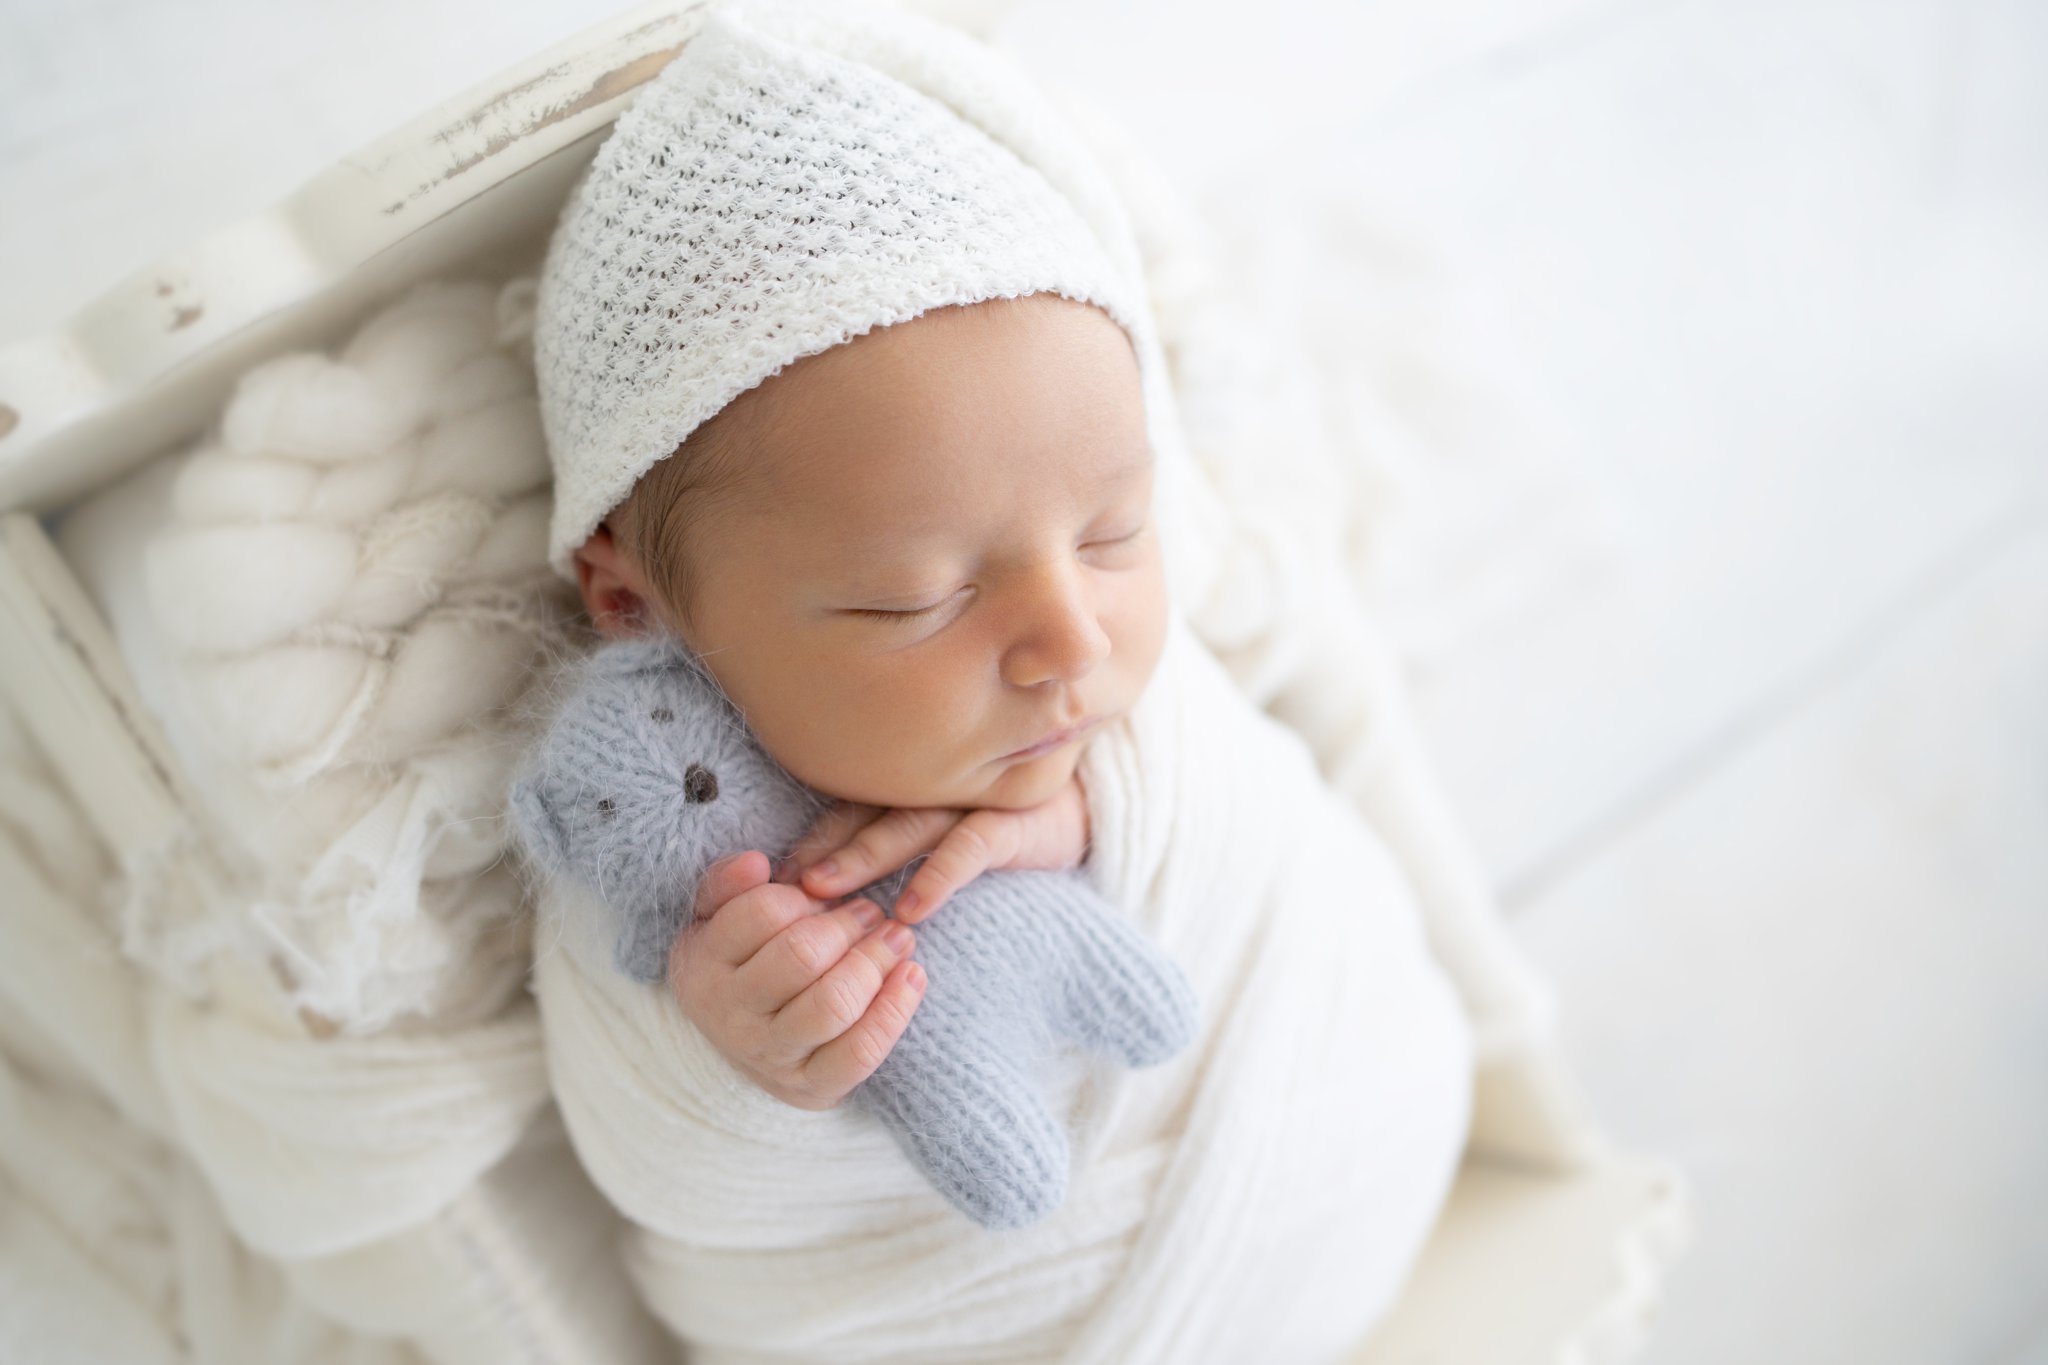 10 day old baby lifestyle photo in studio in Palm Beach Fl